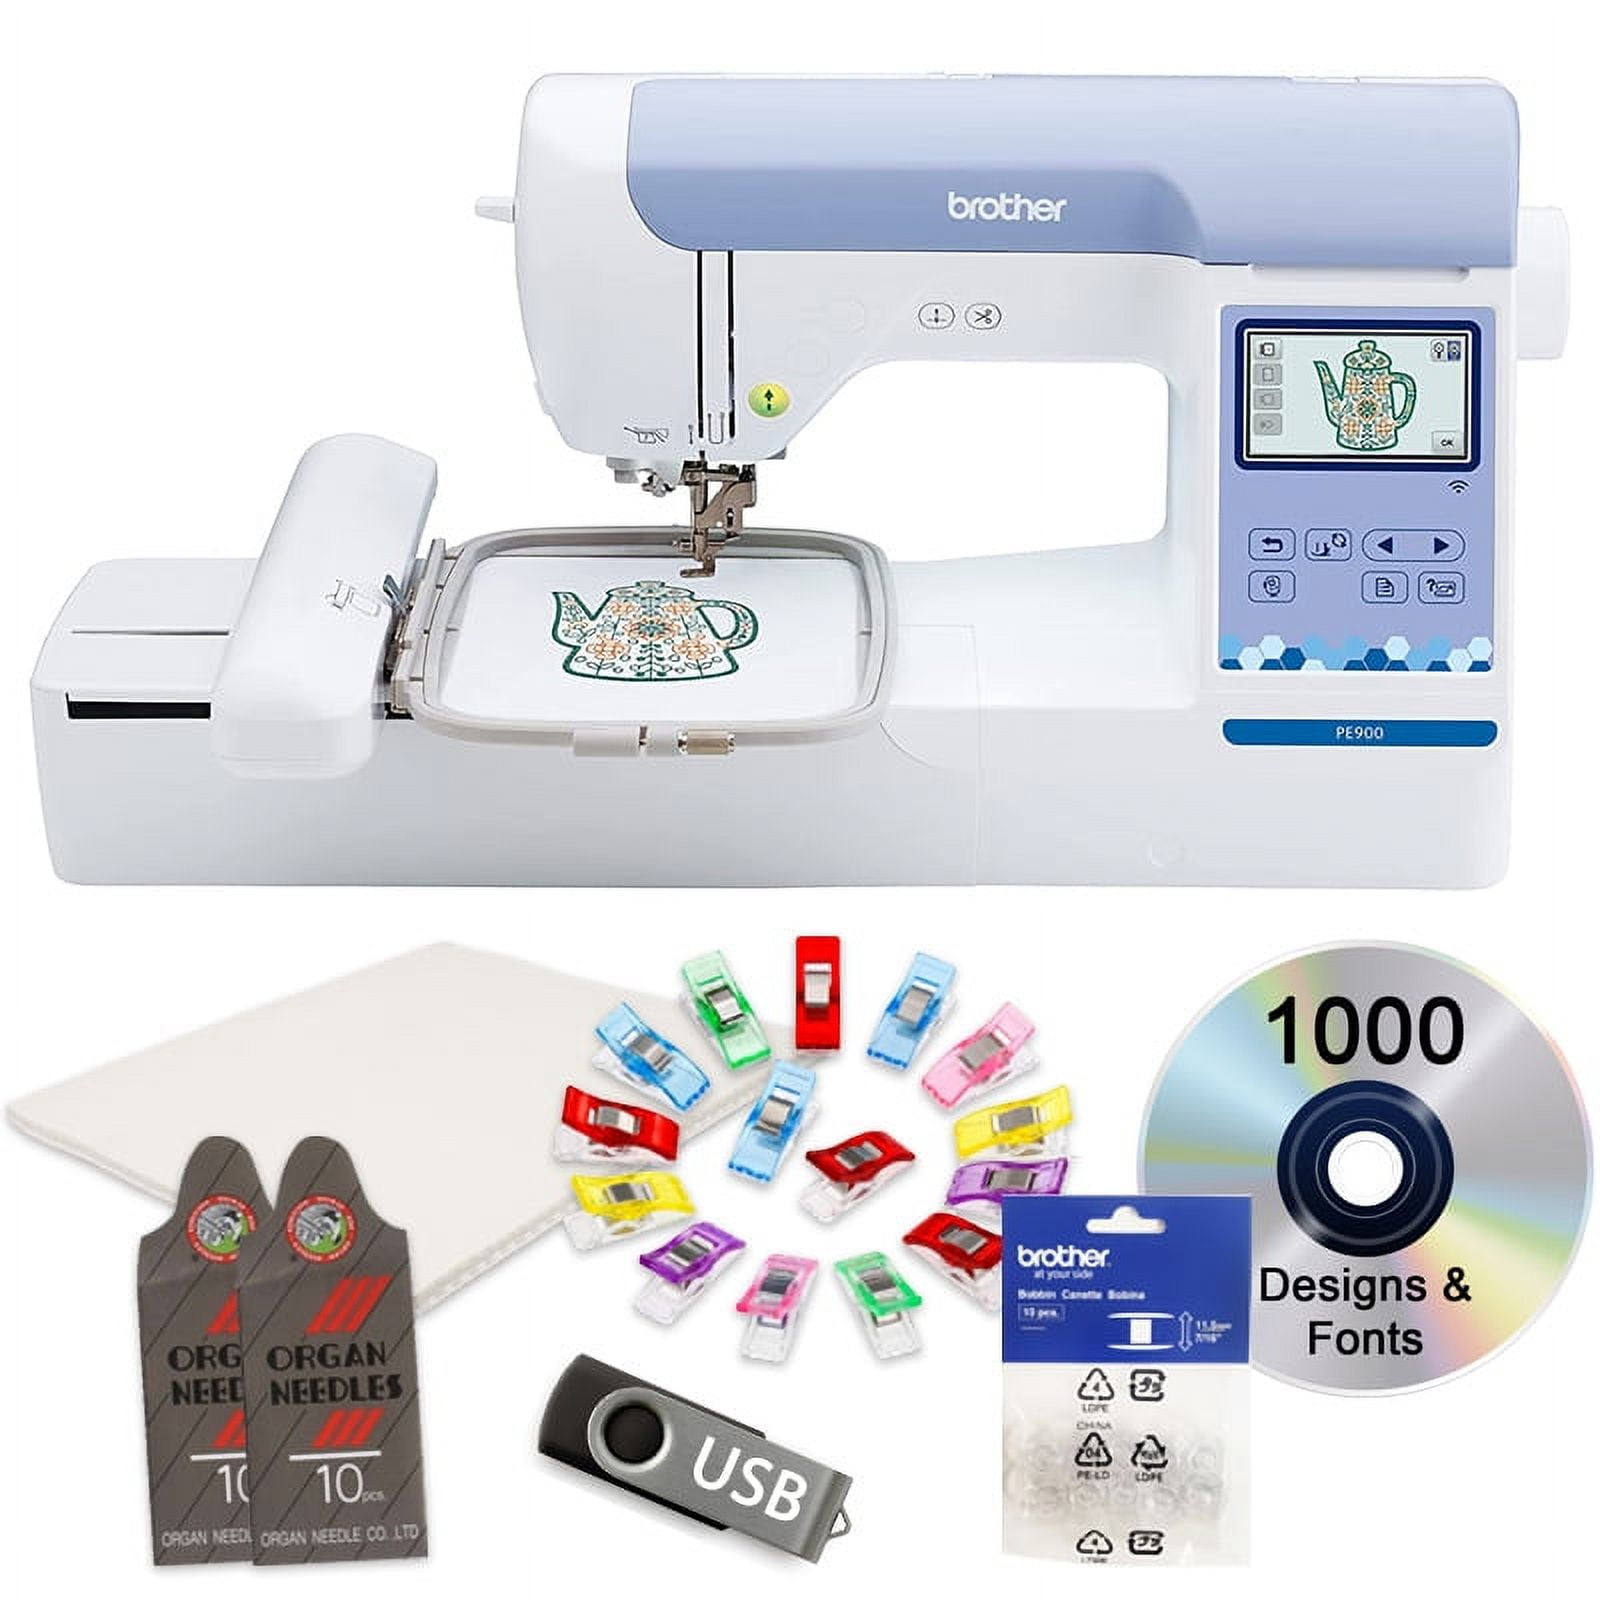 5” x 7” Embroidery Machine with Large Color Touch LCD Screen (Refurbished)